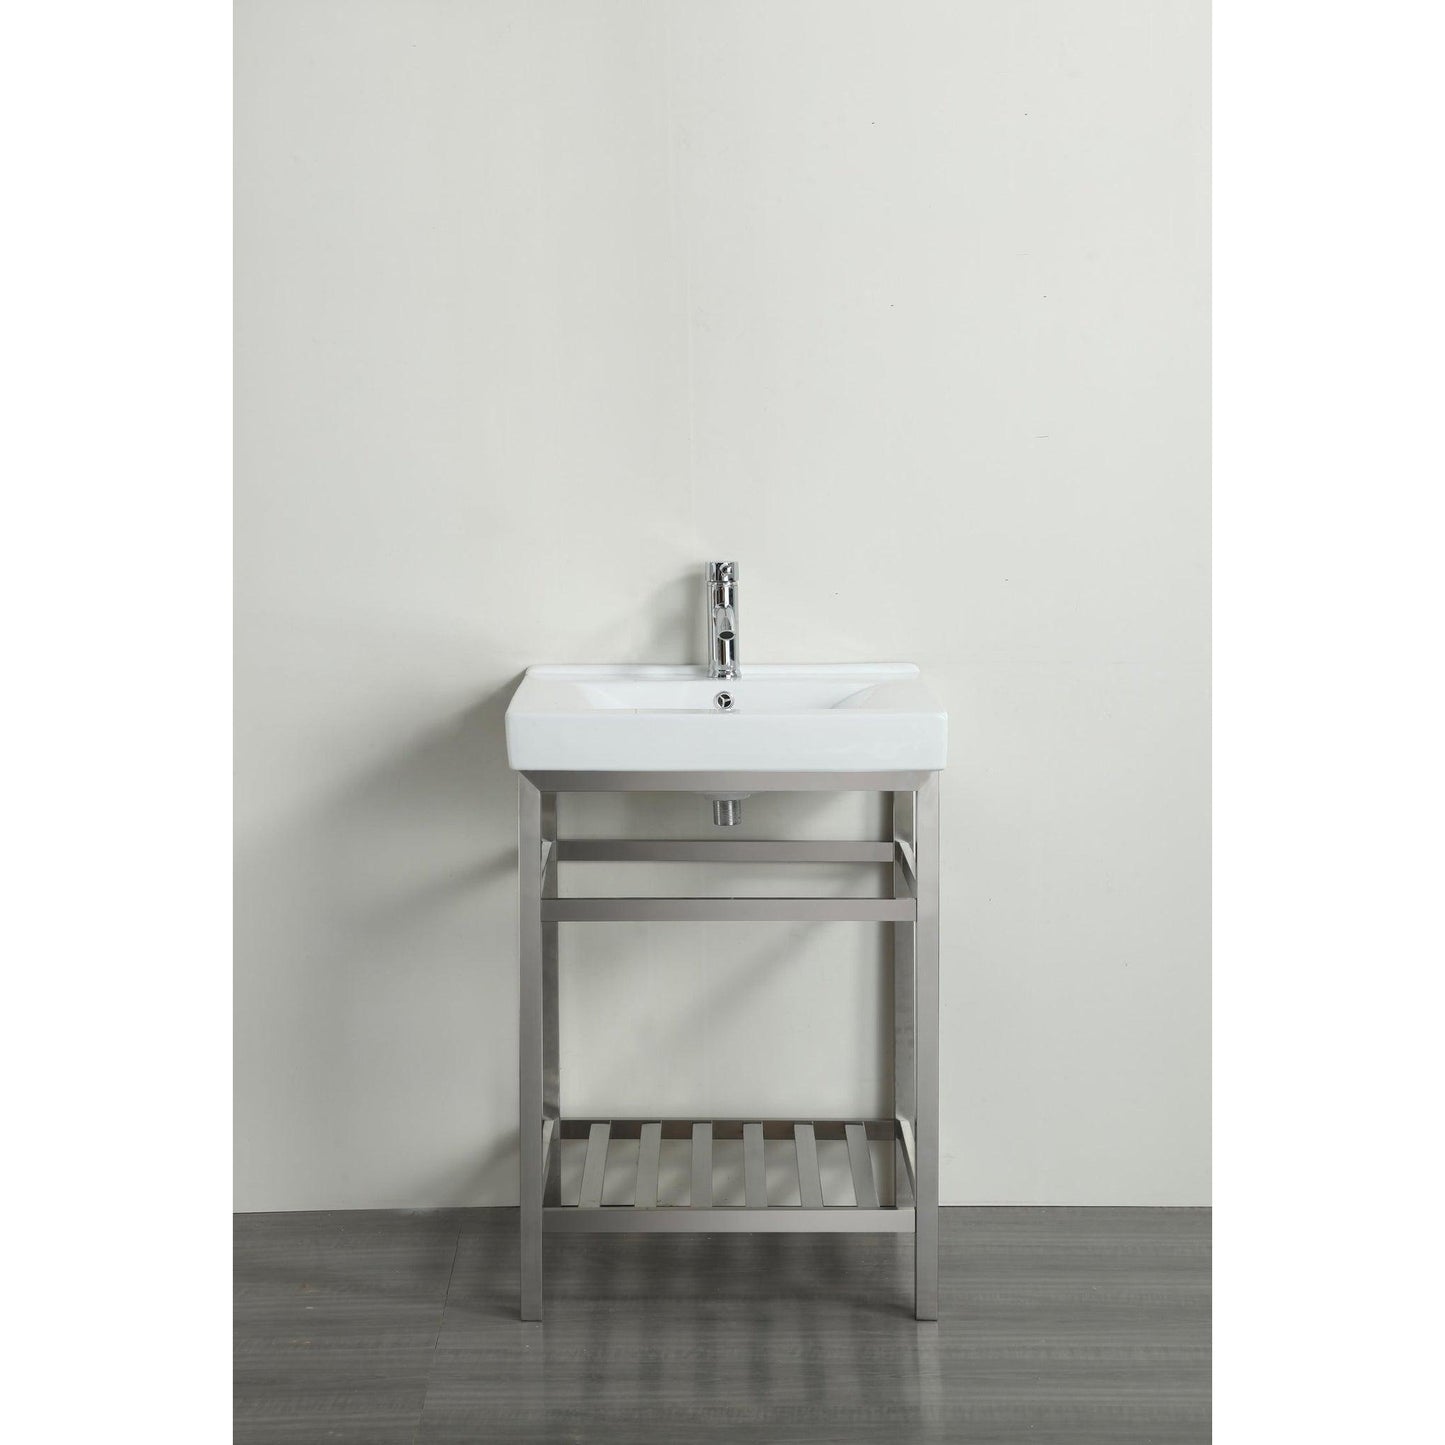 Eviva Stone 24" x 34" Stainless Steel Bathroom Vanity with White Integrated Porcelain Sink